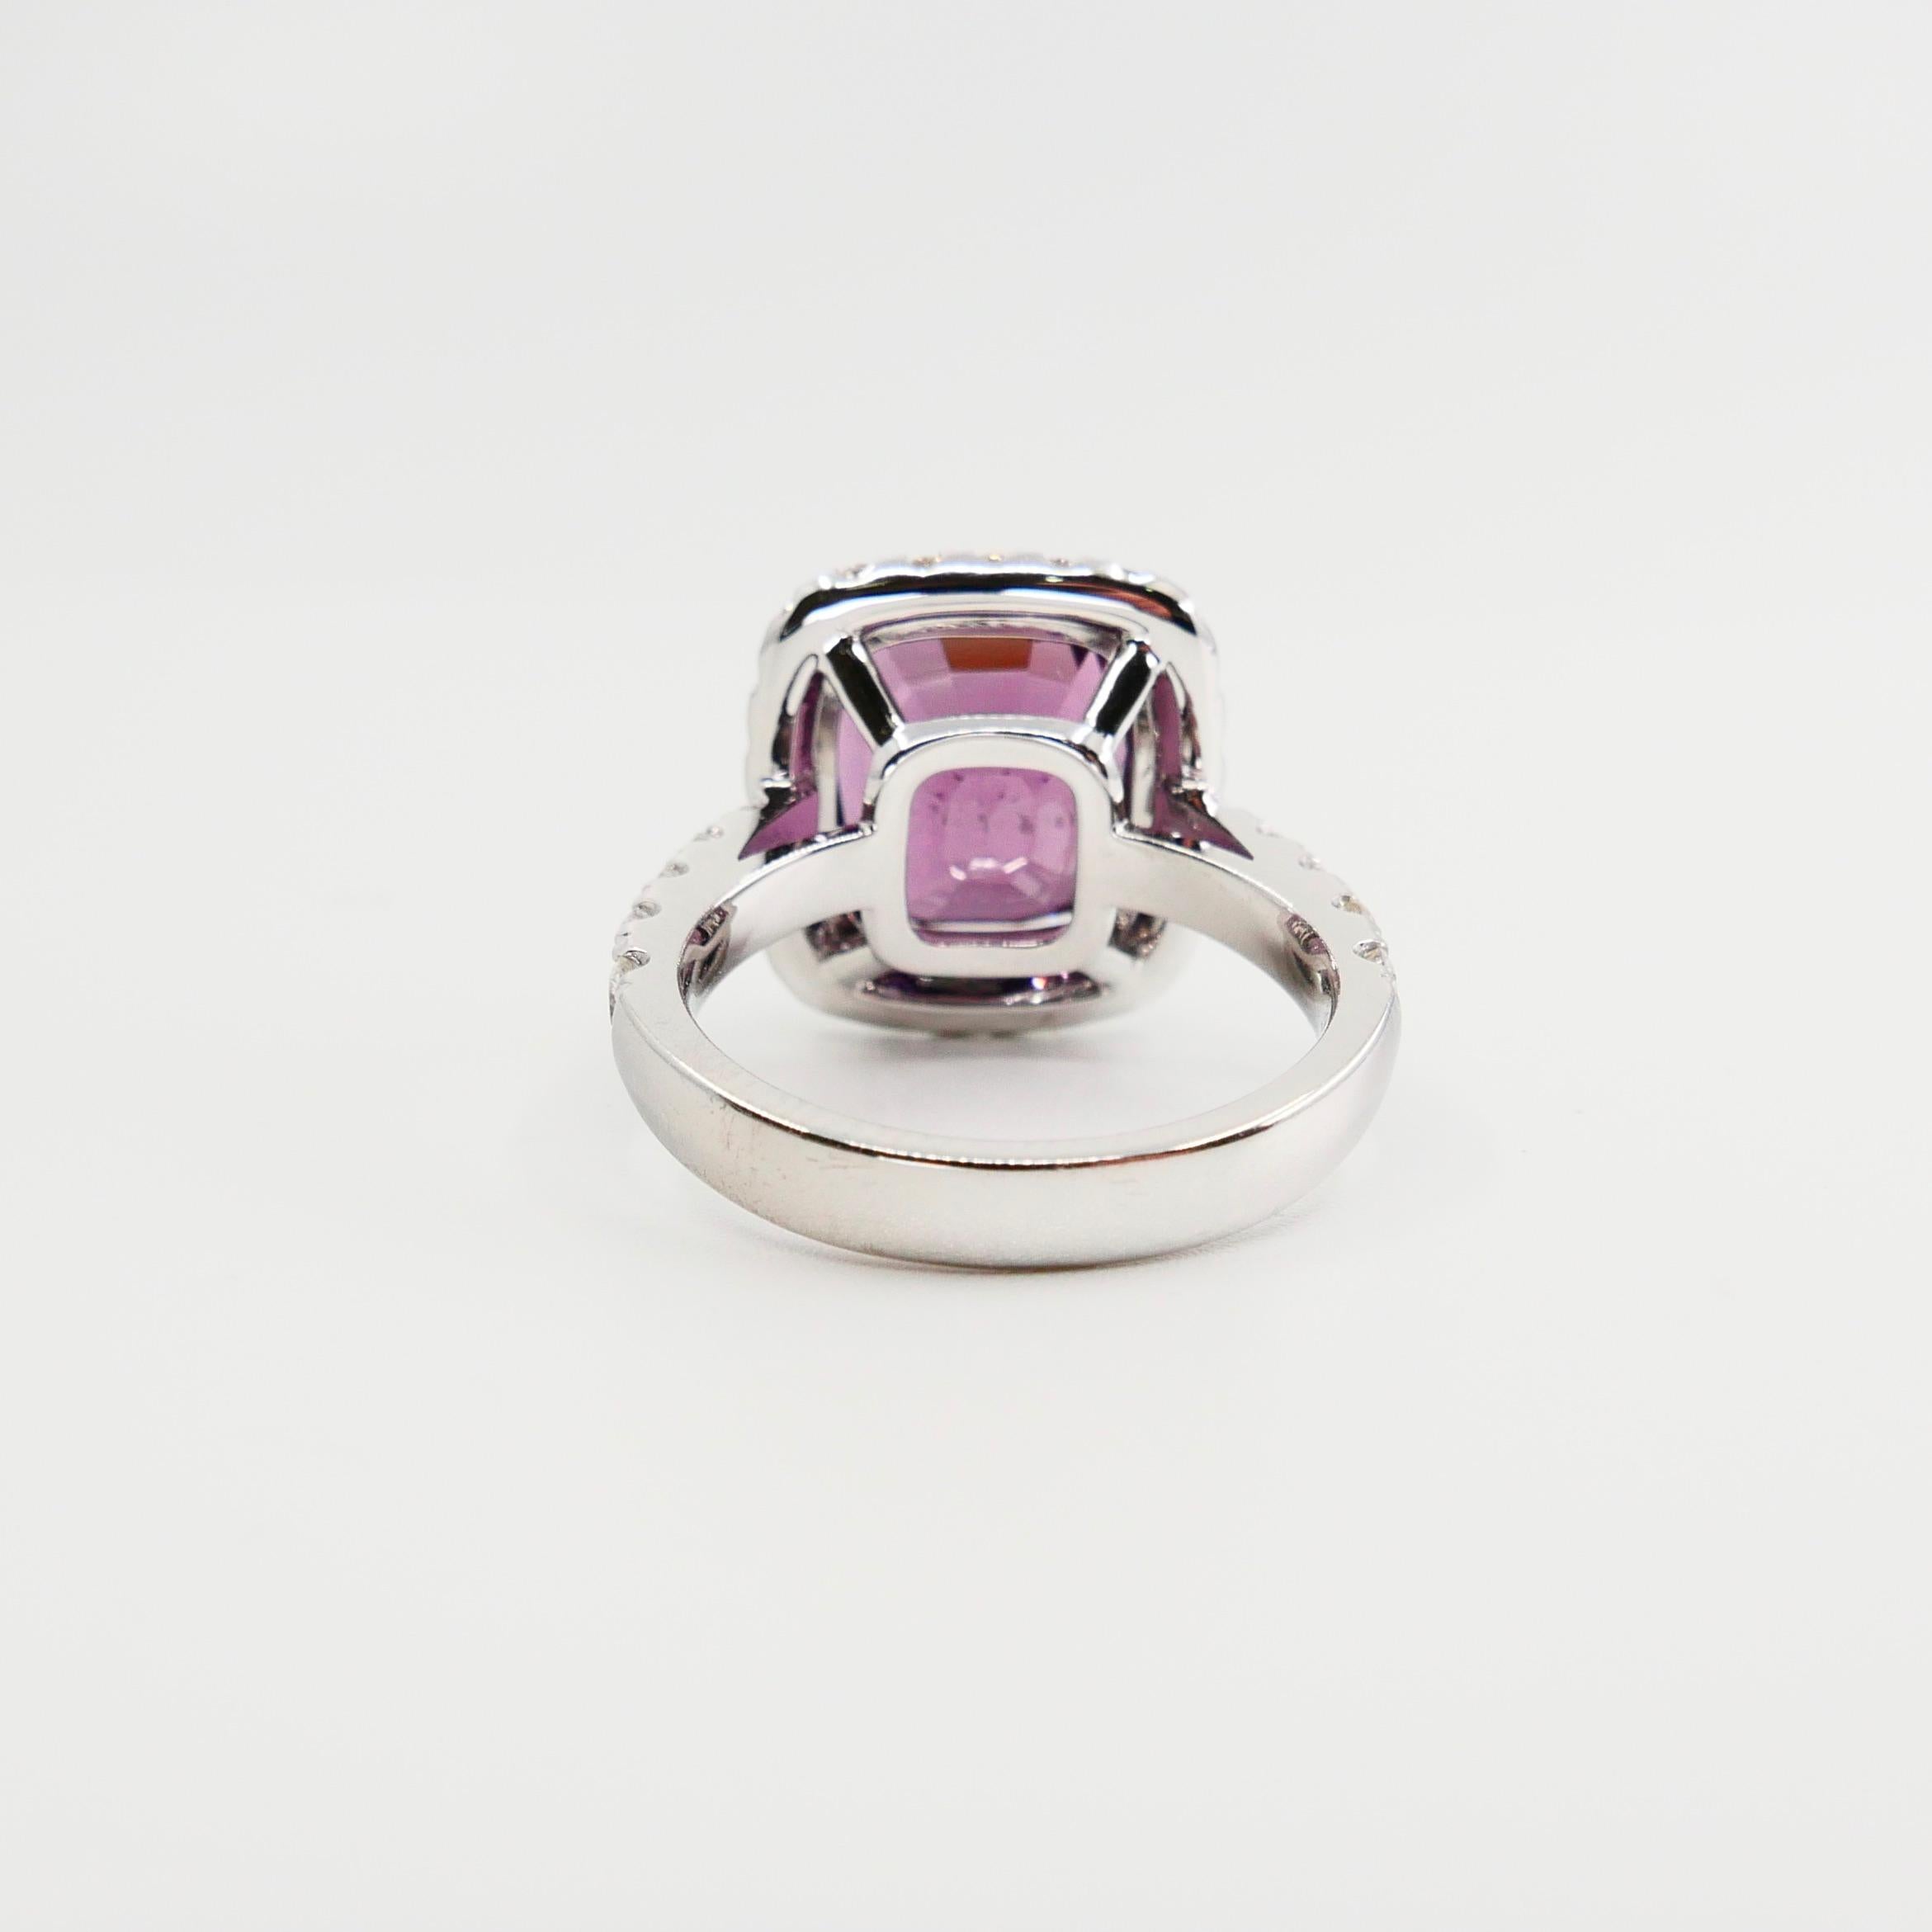 Certified Natural 9.18 Carat Vivid Purple No Heat Spinel & Diamond Cocktail Ring For Sale 4